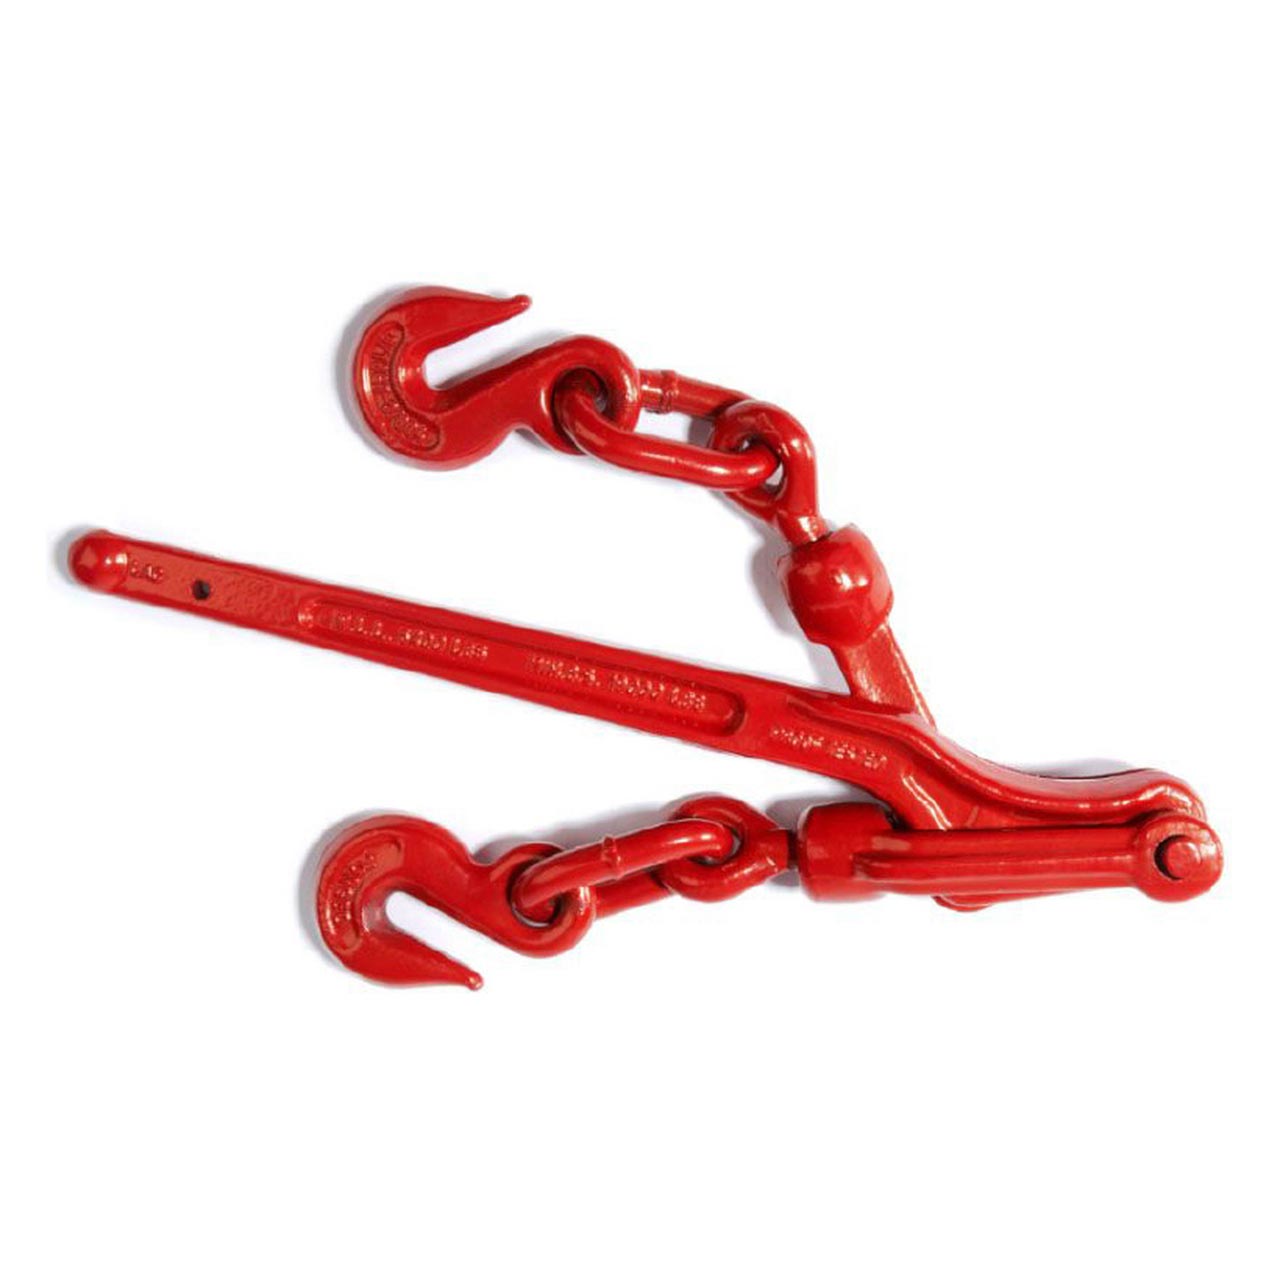 Closed Secure-A-Load 10mm Red Lever Loadbinder Dog complete with two Grab Hooks